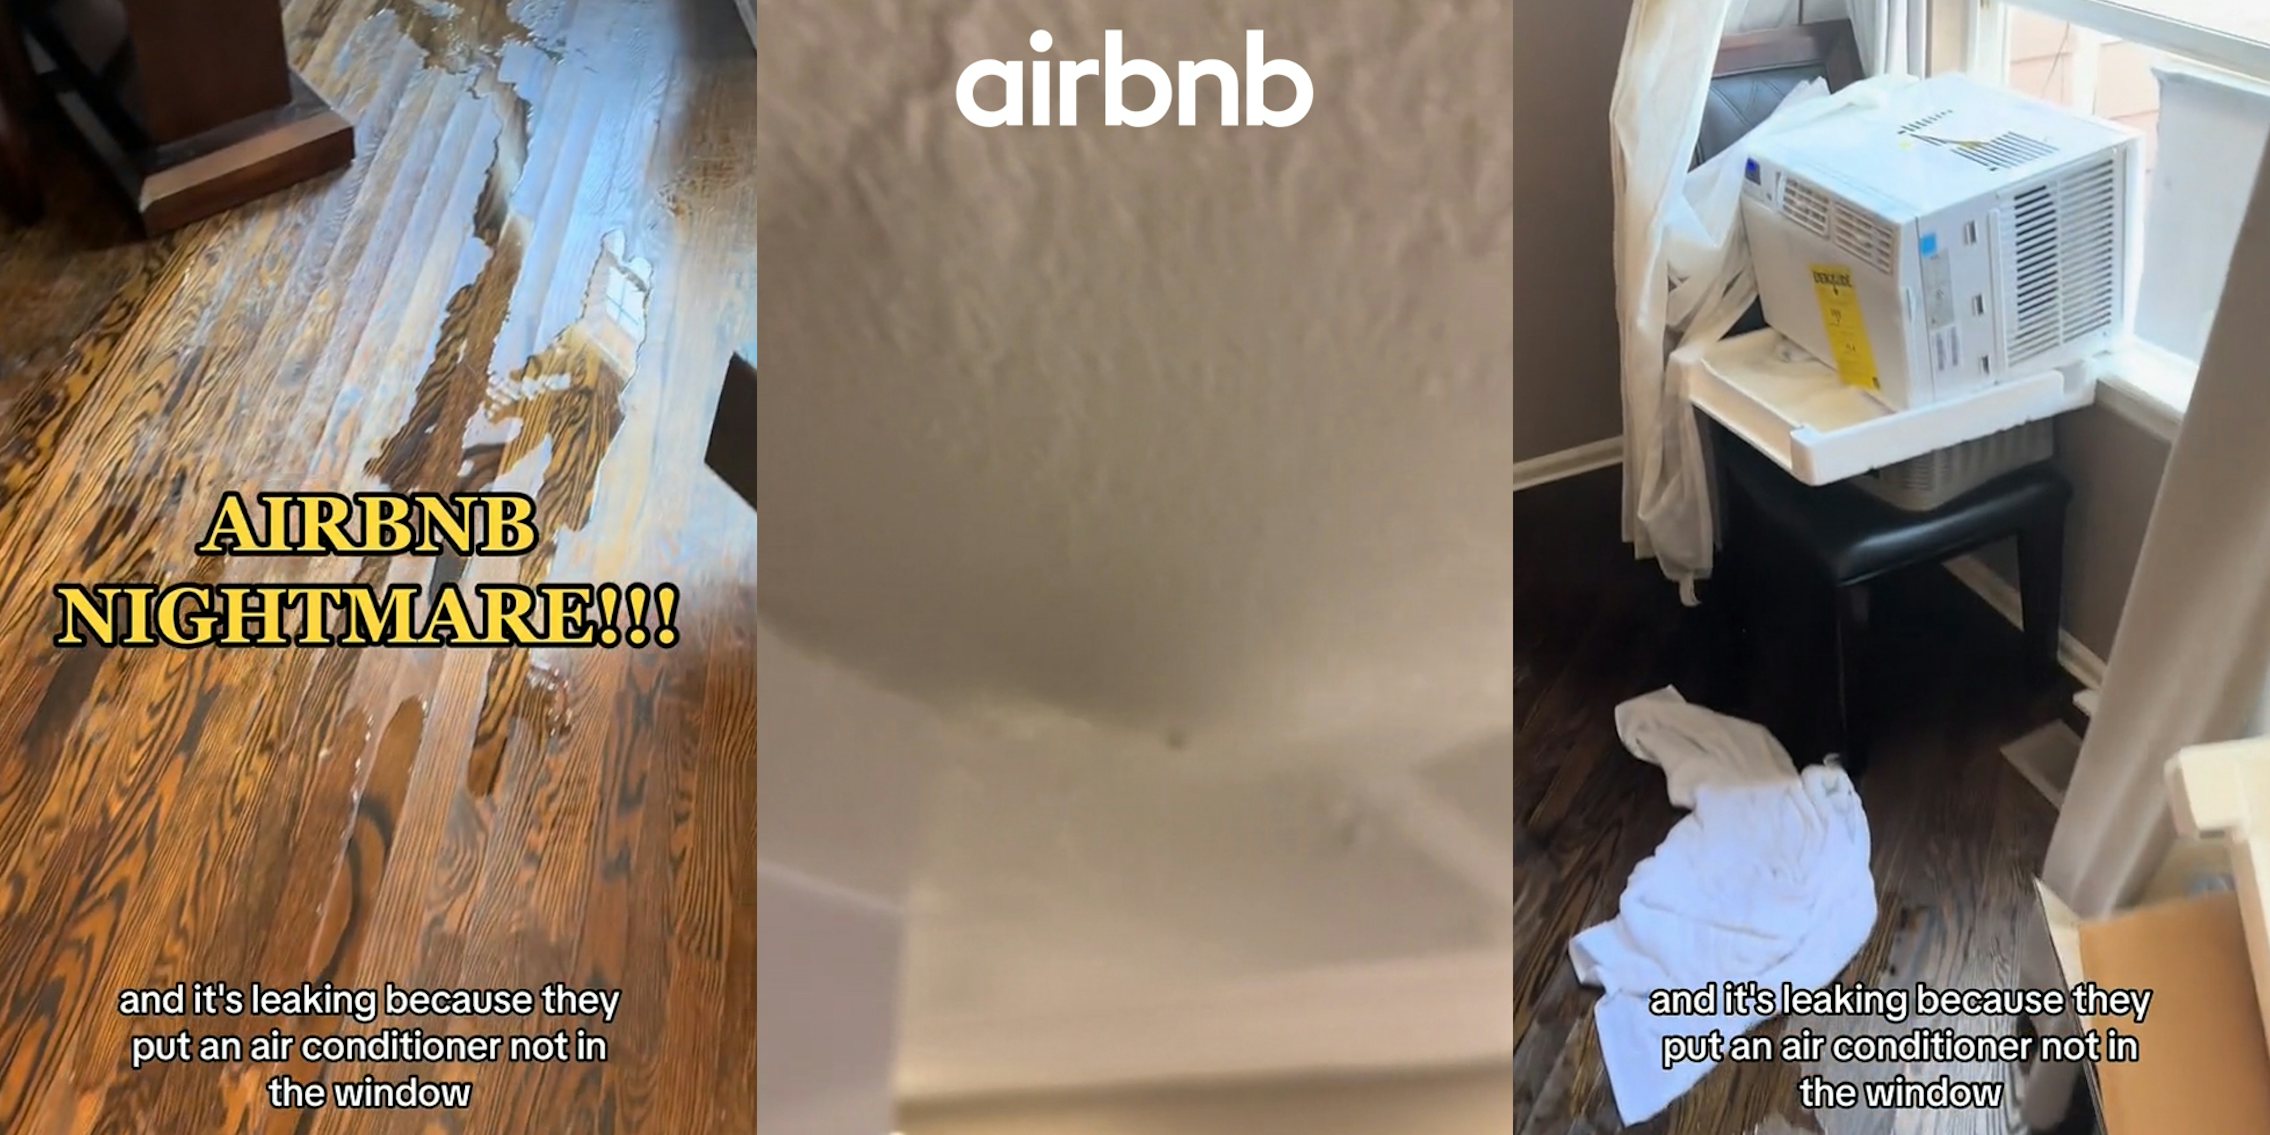 Airbnb interior with water on floor with caption 'AIRBNB NIGHTMARE!!! and it's leaking because they put an air conditioner not in the window' (l) Airbnb lower floor ceiling with water damage with Airbnb logo at top (c) AC on chair next to window in Airbnb with caption 'and it's leaking because they put an air conditioner not in the window' (r)